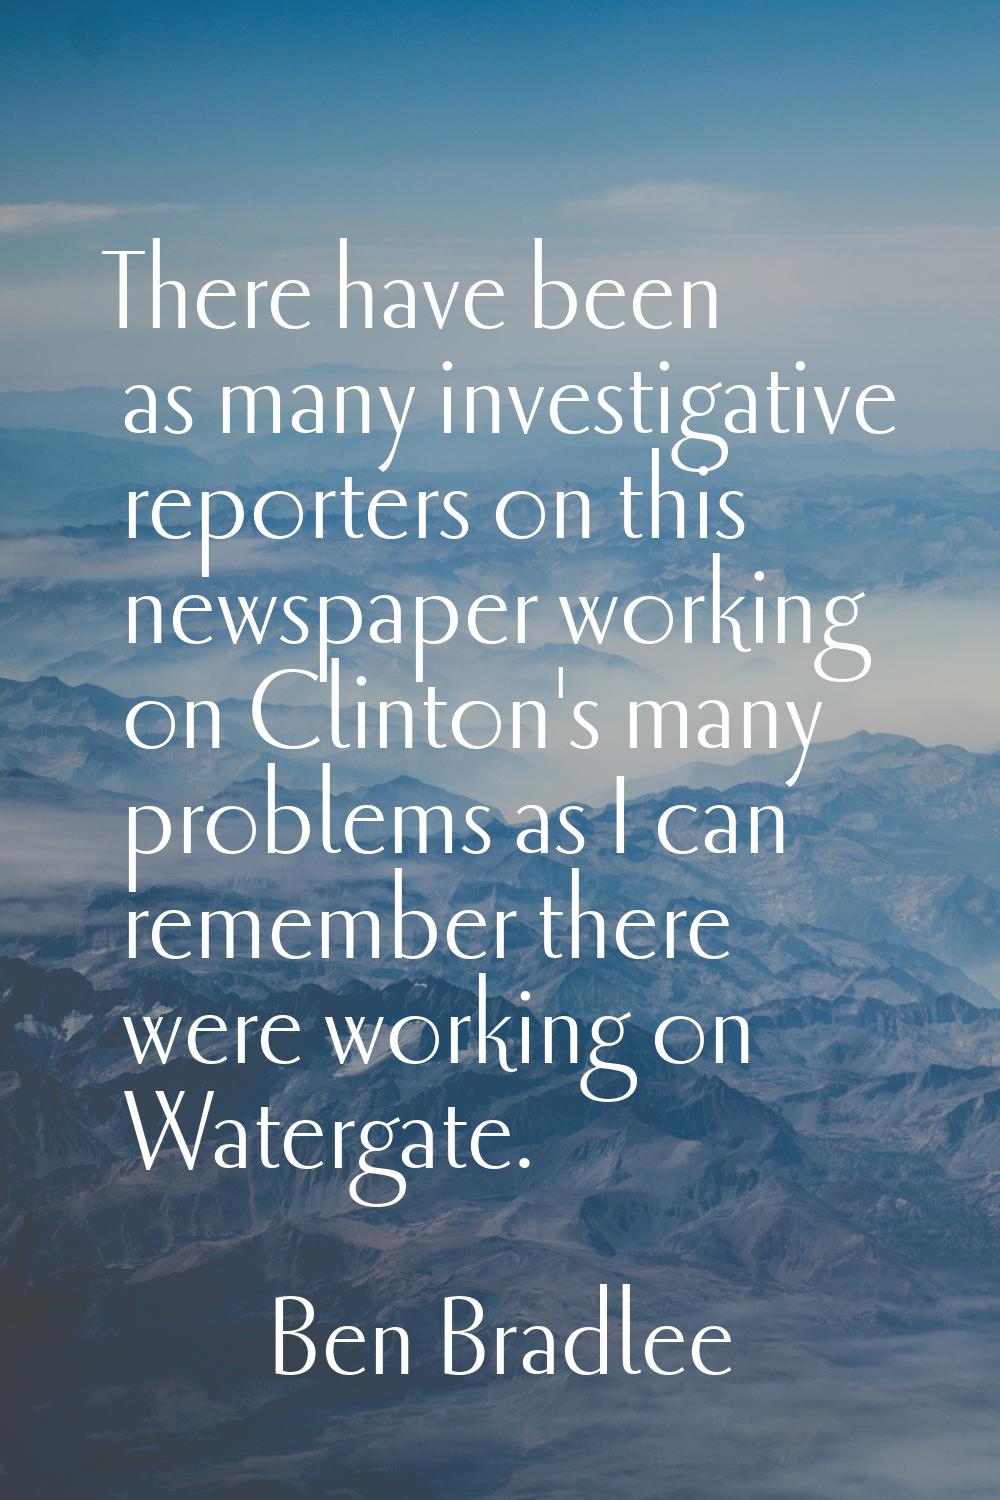 There have been as many investigative reporters on this newspaper working on Clinton's many problem